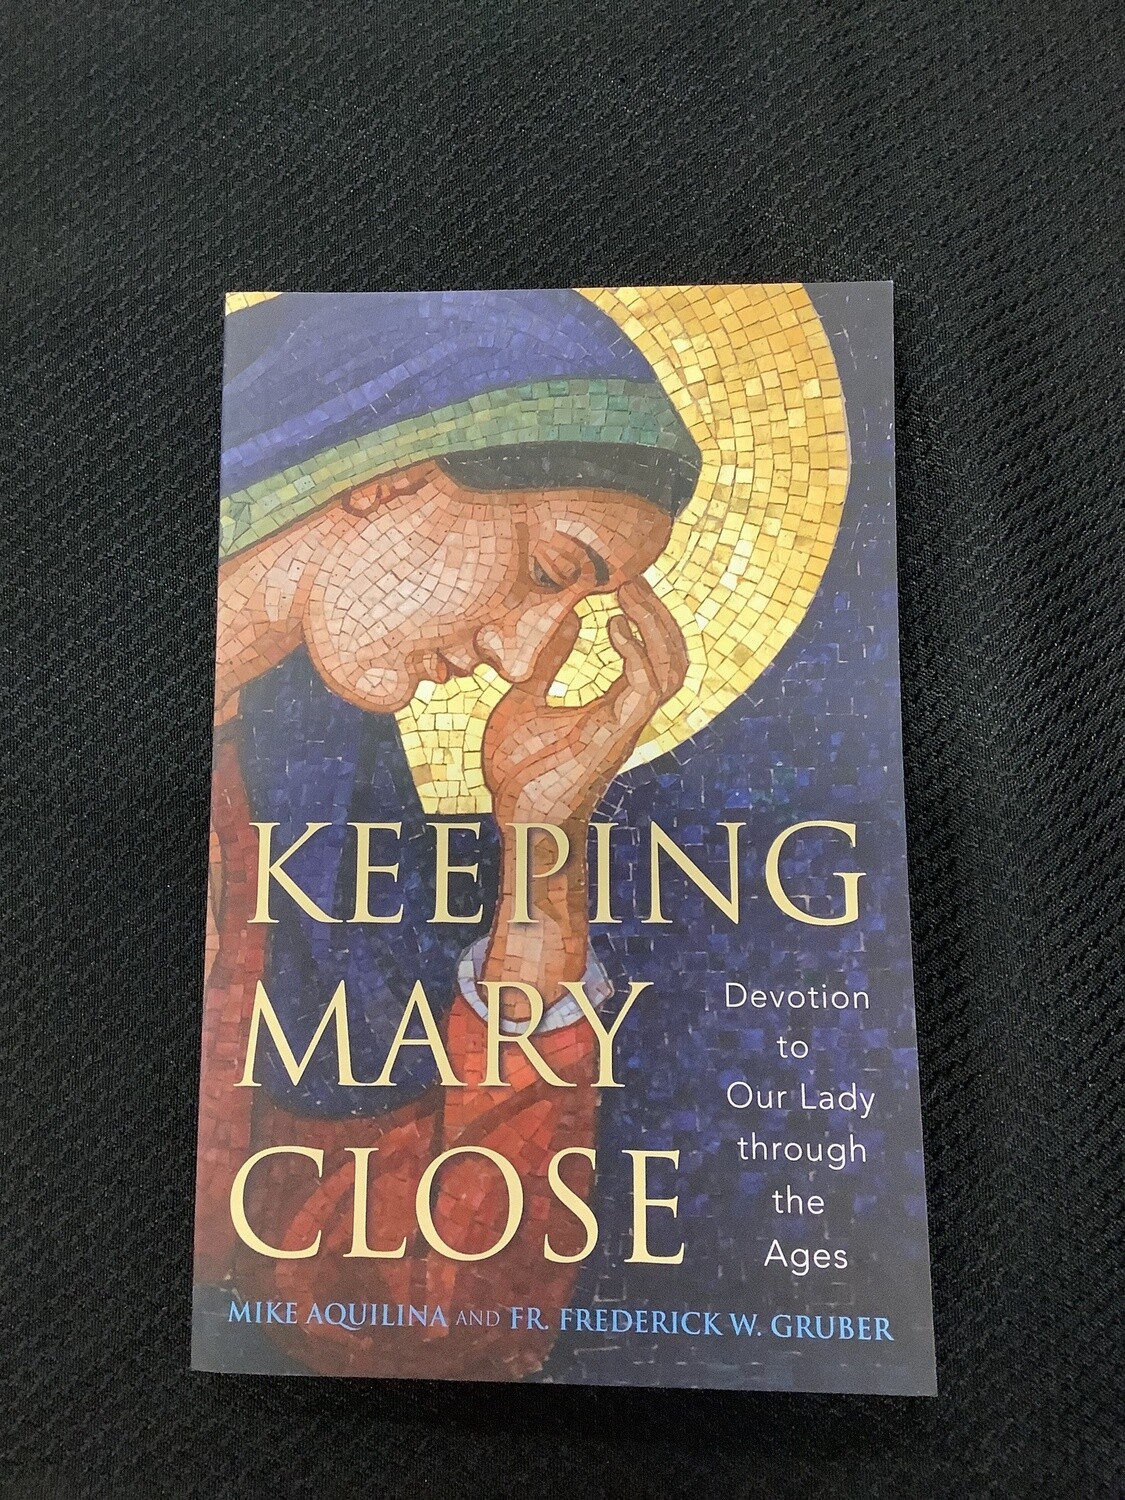 Keeping Mary Close Devotion to Our Lady through the Ages - Mike Aquilina and Fr. Frederick W. Gruber